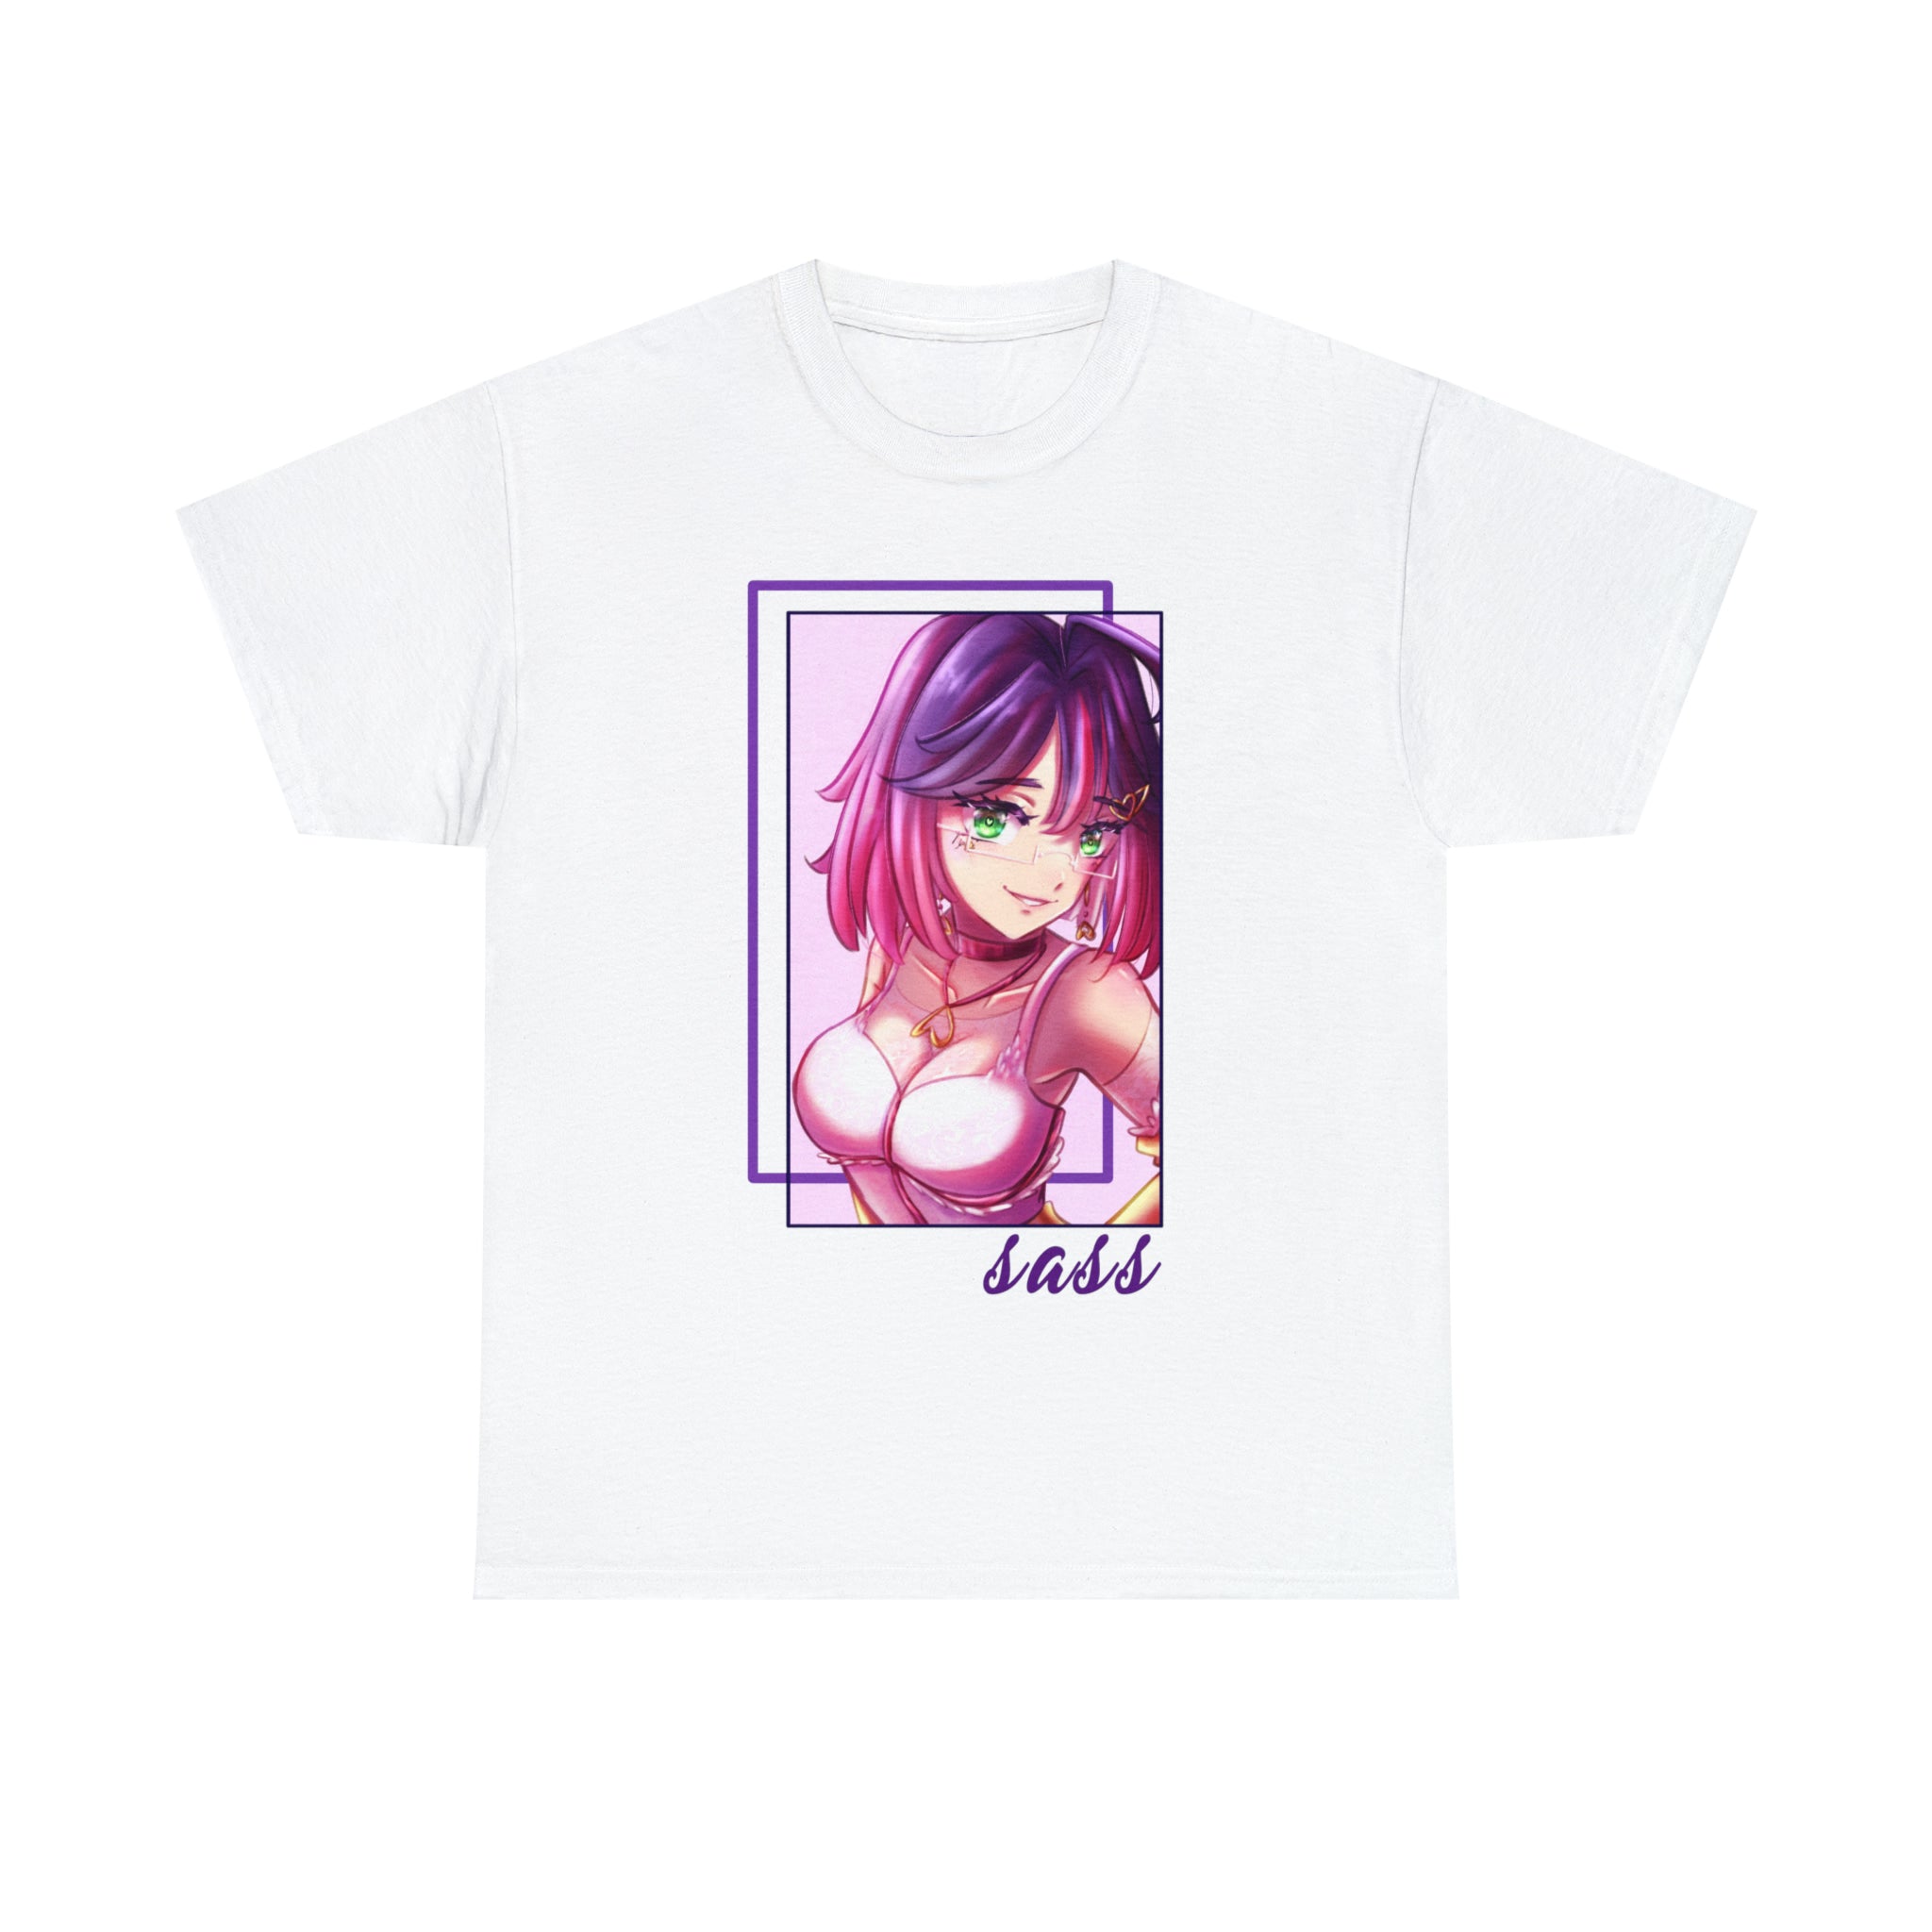 A Sass T-Shirt featuring artwork of a girl with purple hair.